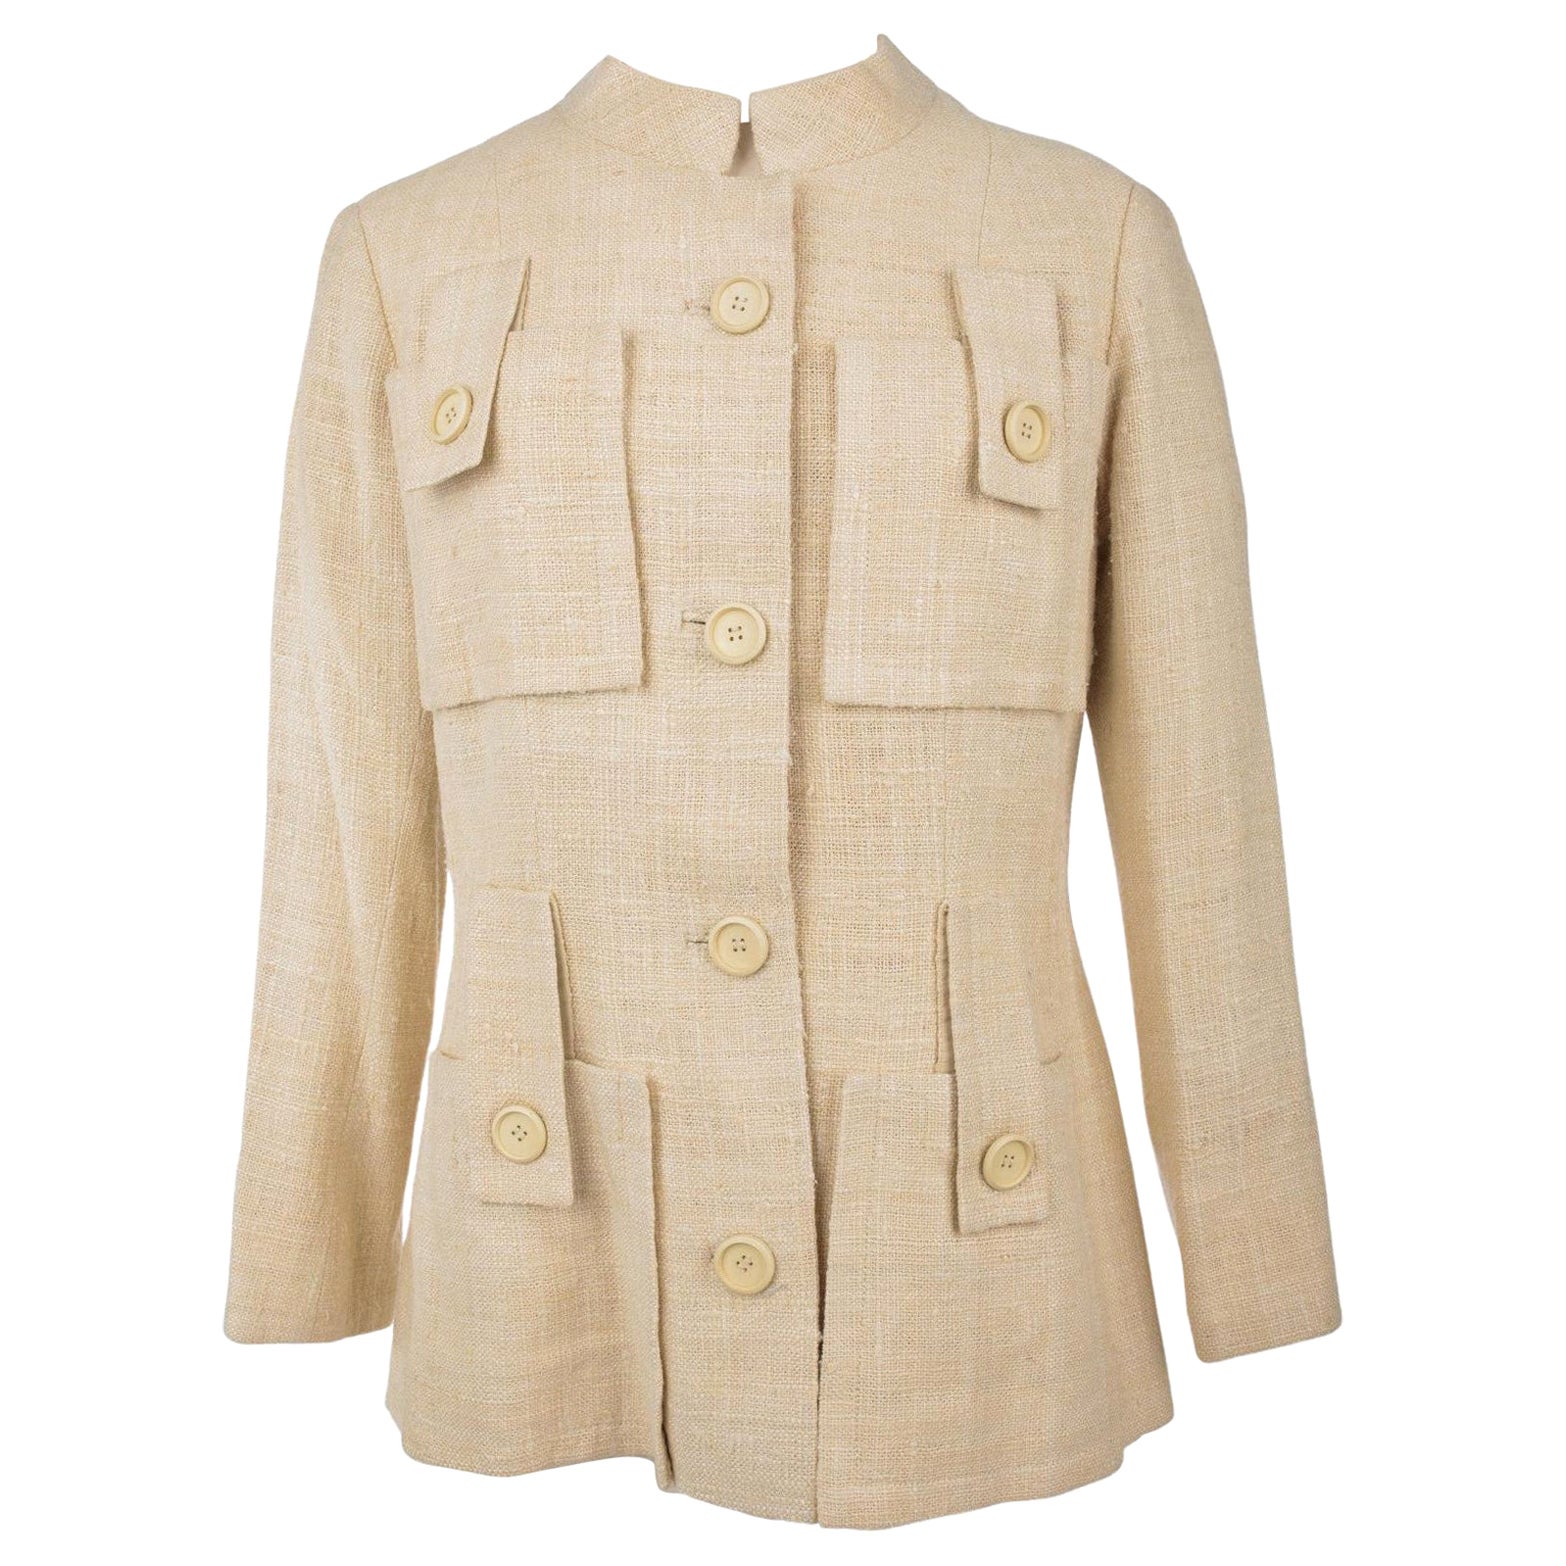  A French Safari Jacket In Beige Linen And Silk Toile Circa 1968-1972